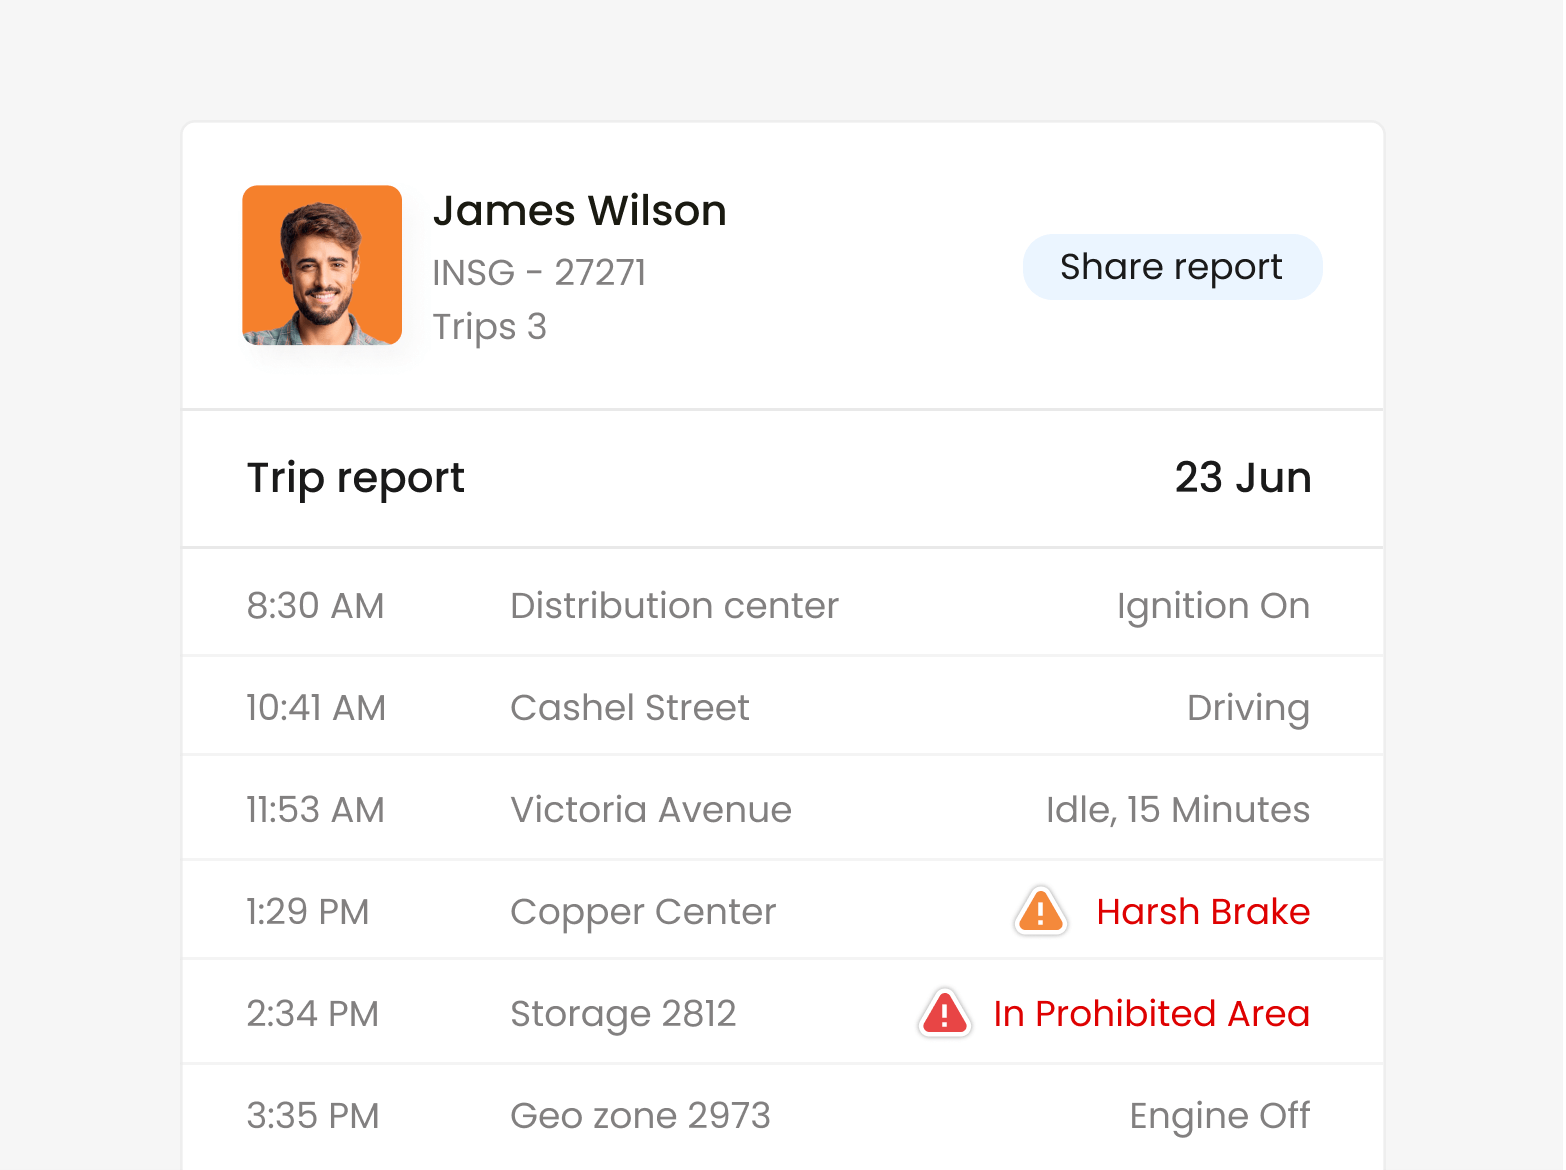 Picture of a full trip report generated by Inseego's fleet tracking software.